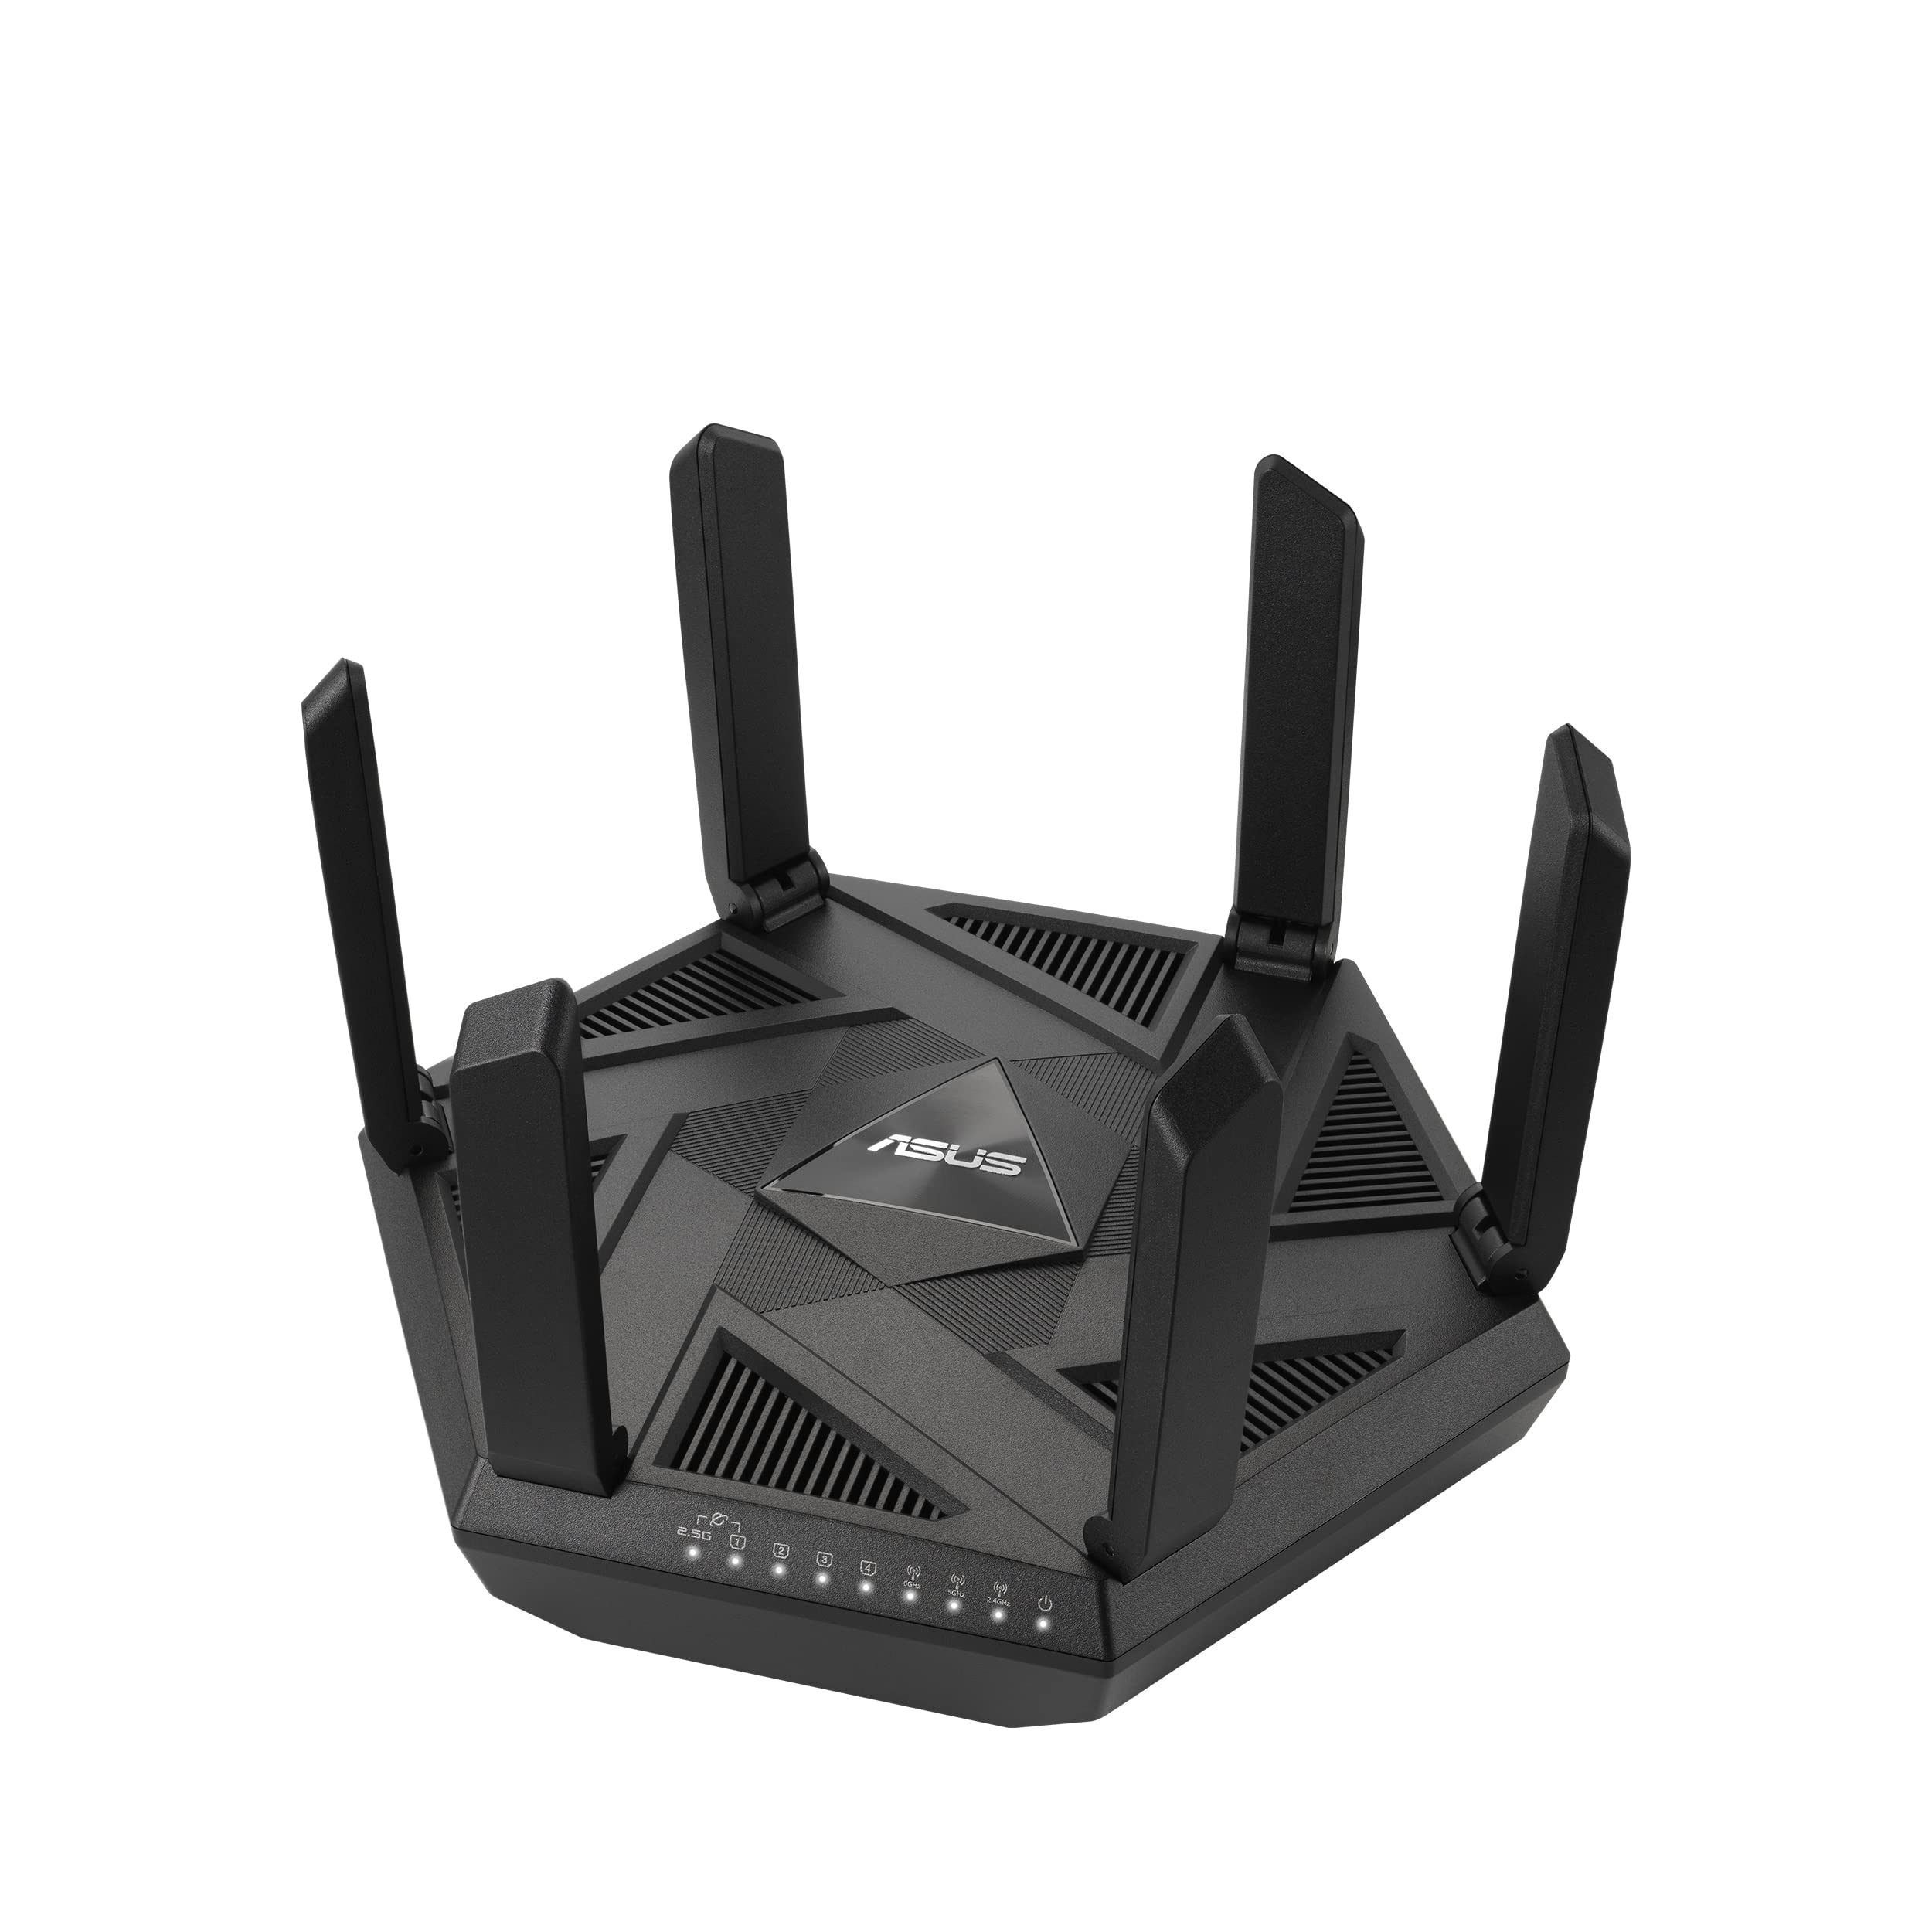 ASUS RT-AXE7800 Tri-band 6 GHz WiFi 6E Router w/ 2.5G Port - $249.99 + F/S - Amazon